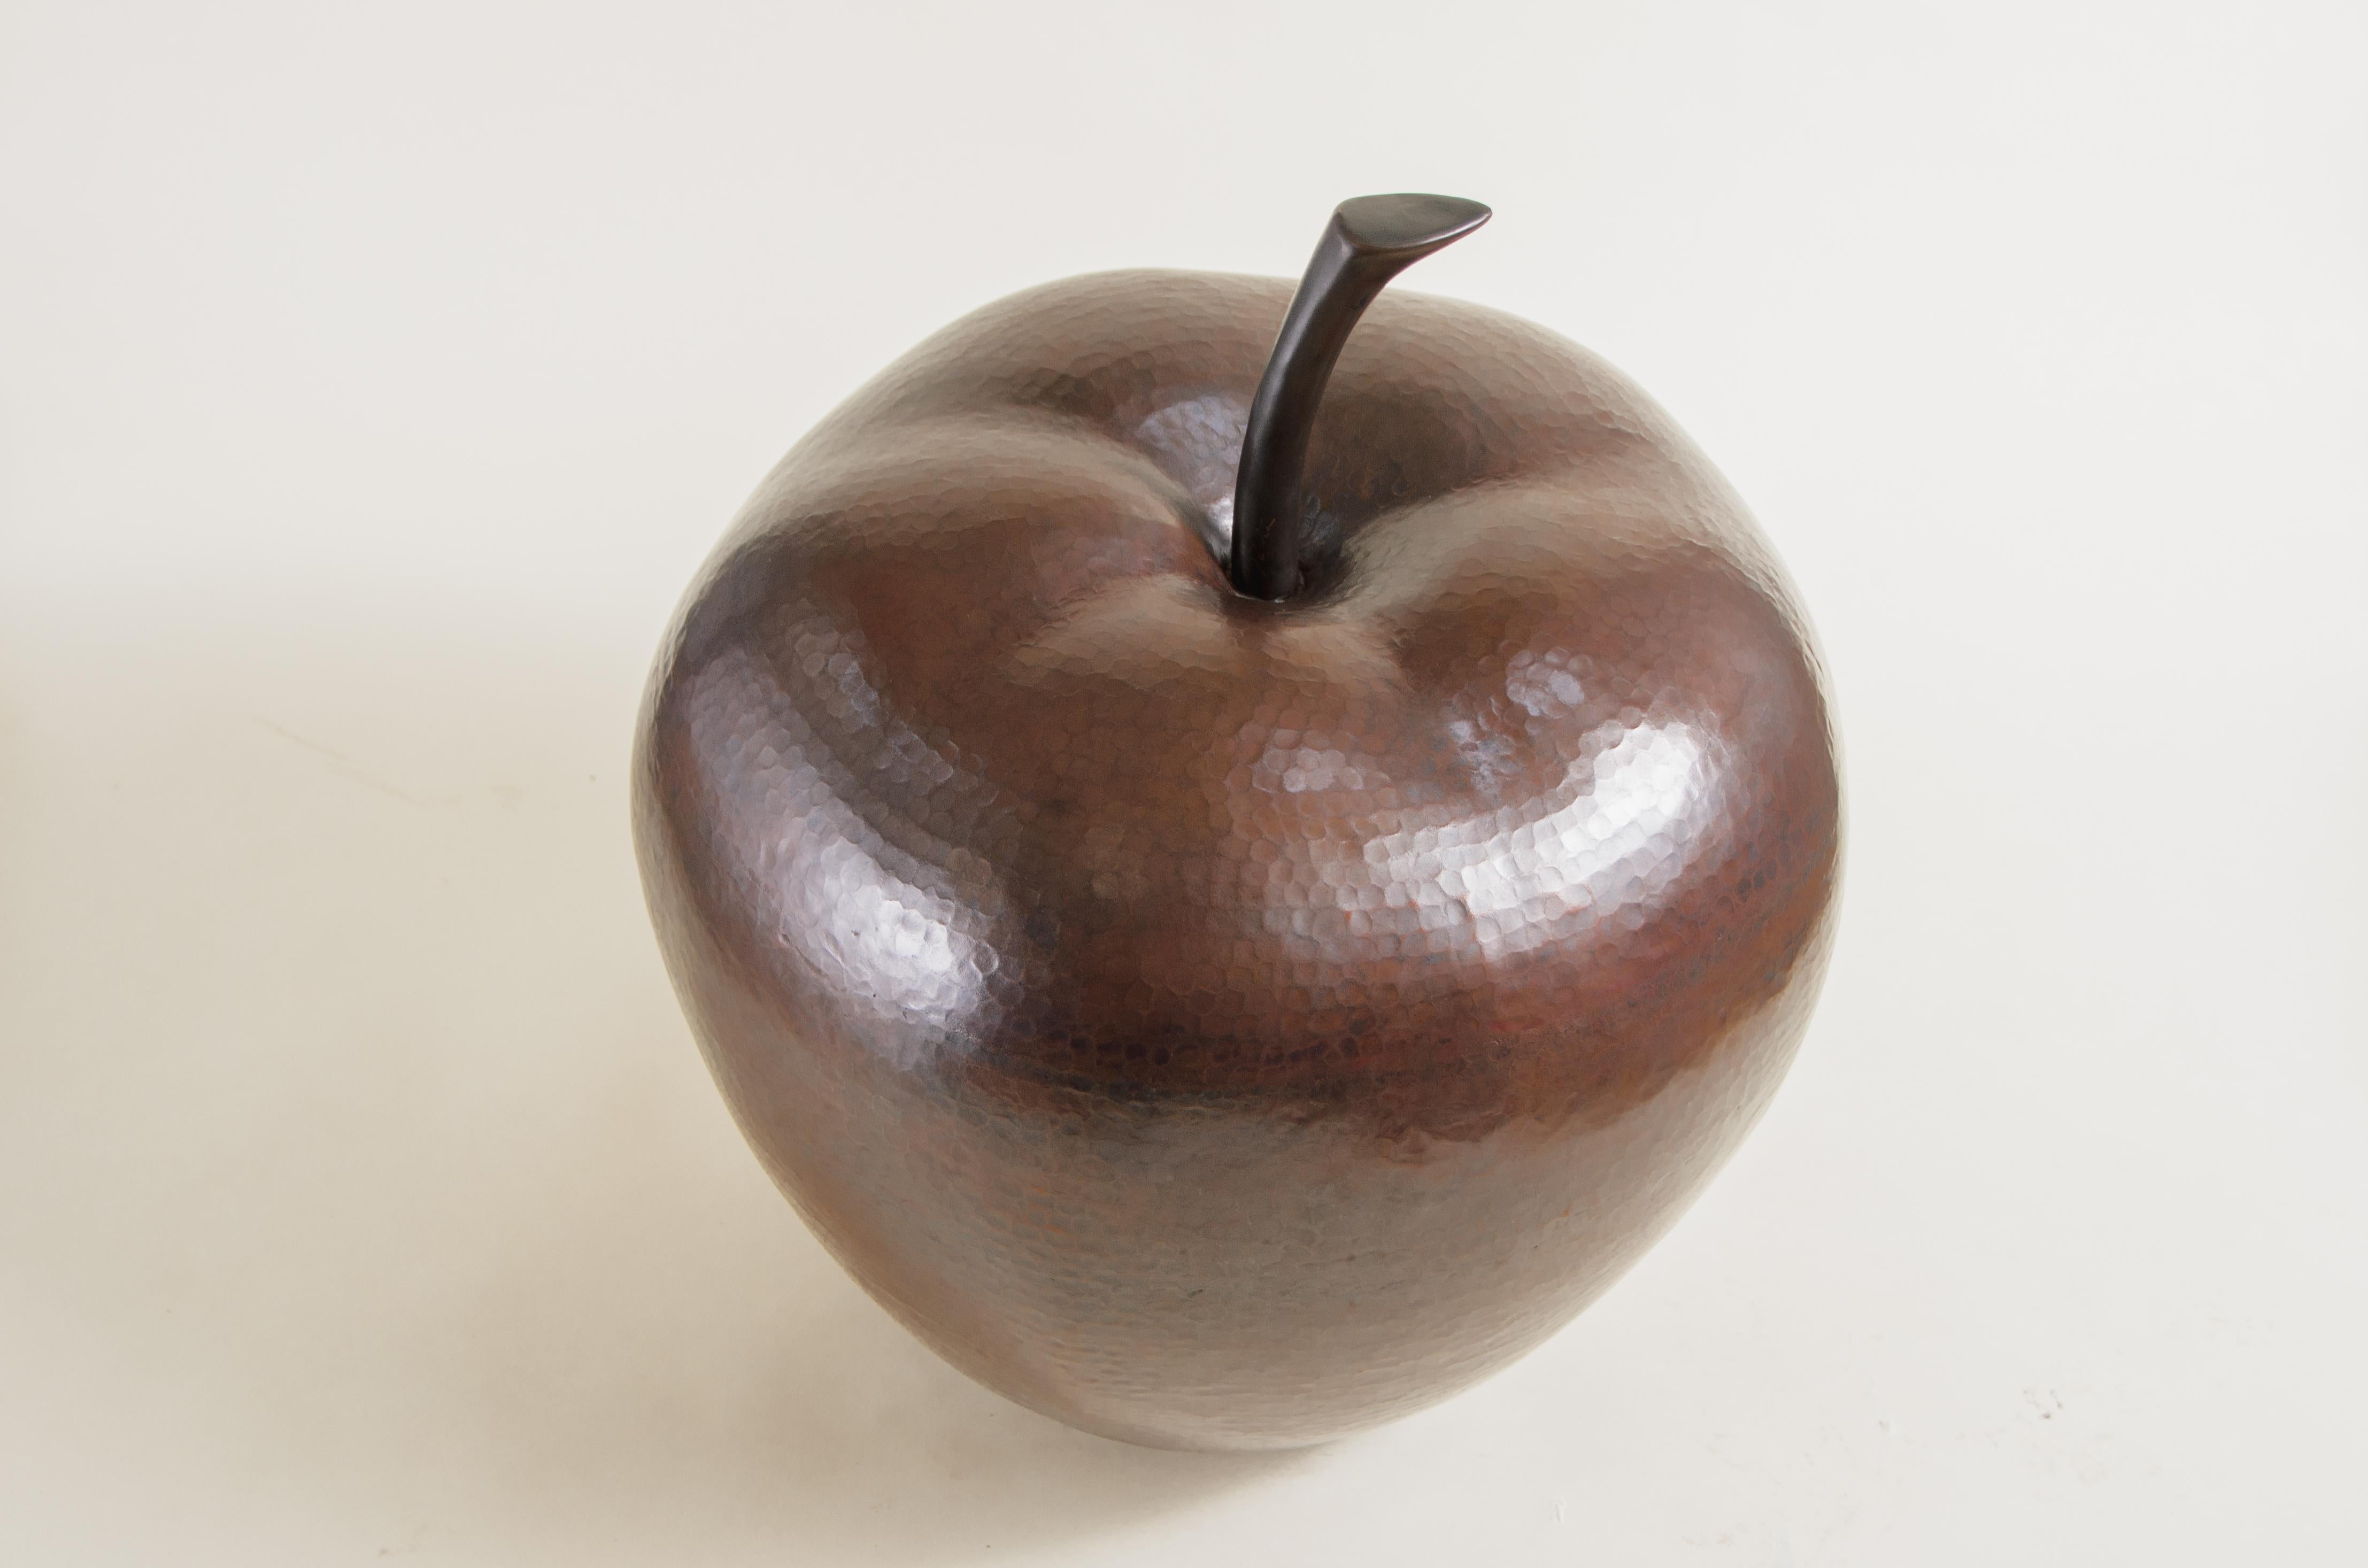 Hammered Contemporary Copper Apple Sculpture by Robert Kuo, Repoussé, Limited Edition For Sale